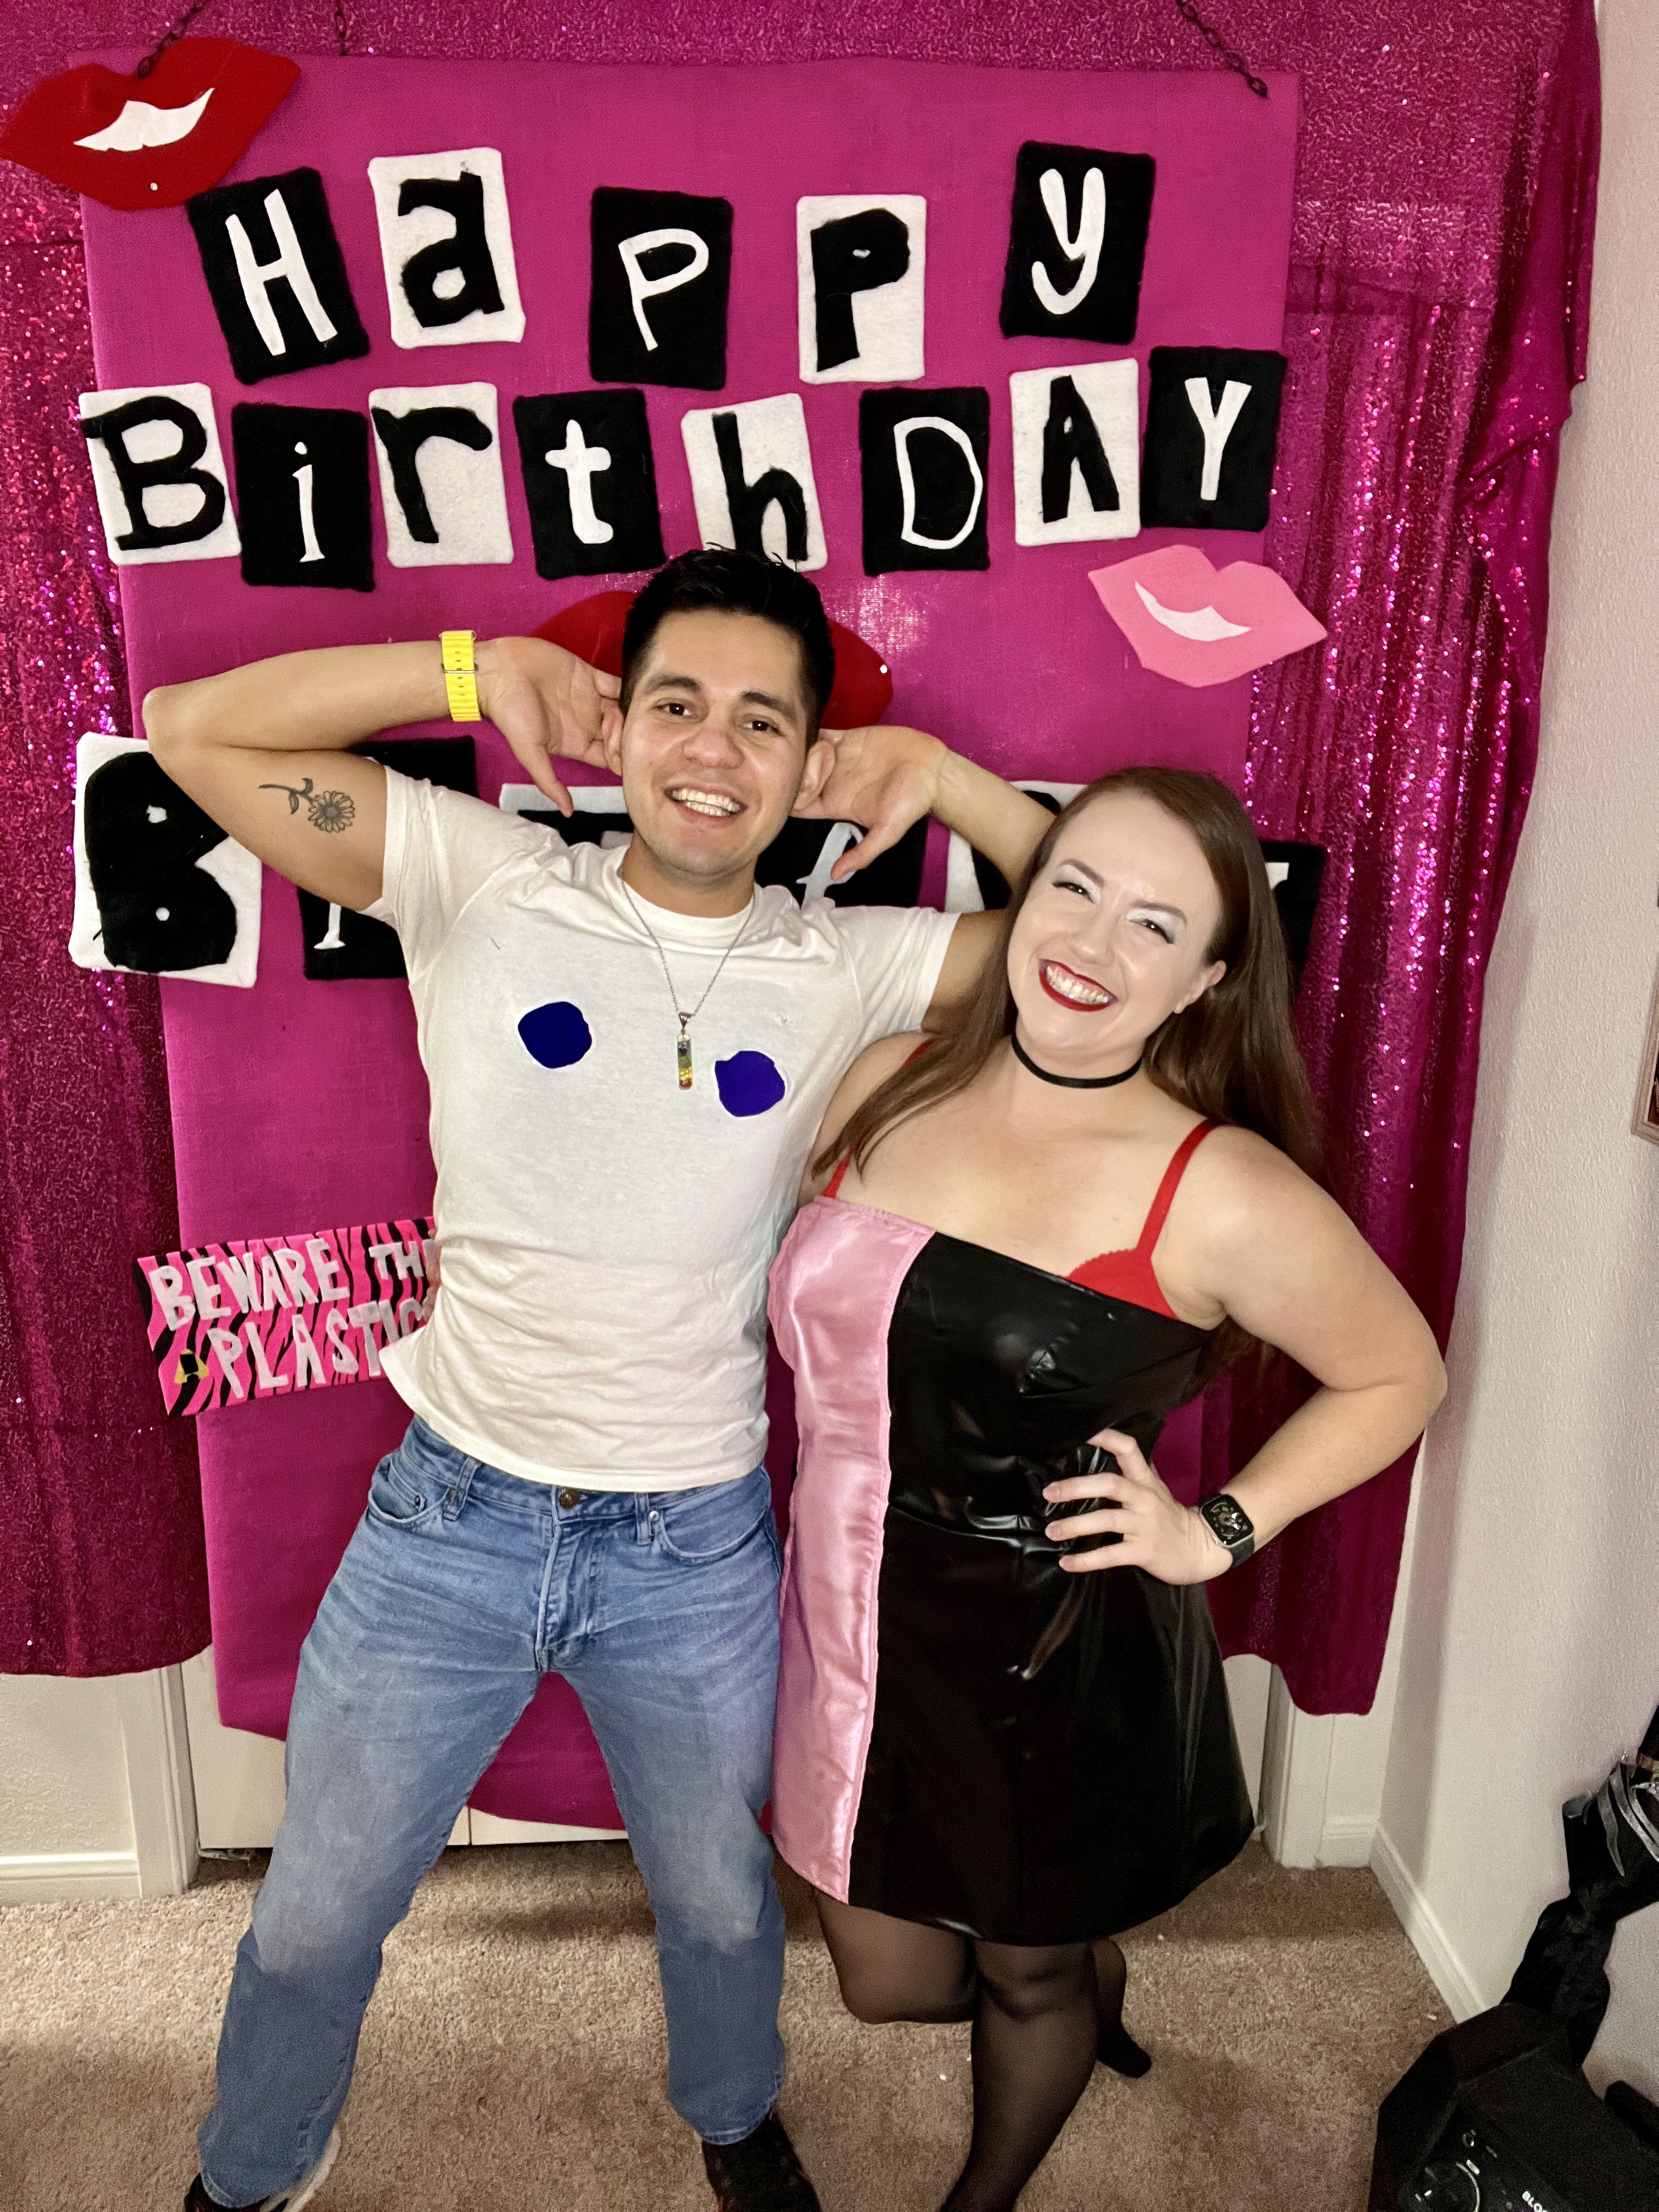 How to Throw a Totally Fetch Mean Girls Birthday Party - What Is Hey Bails  Doing?